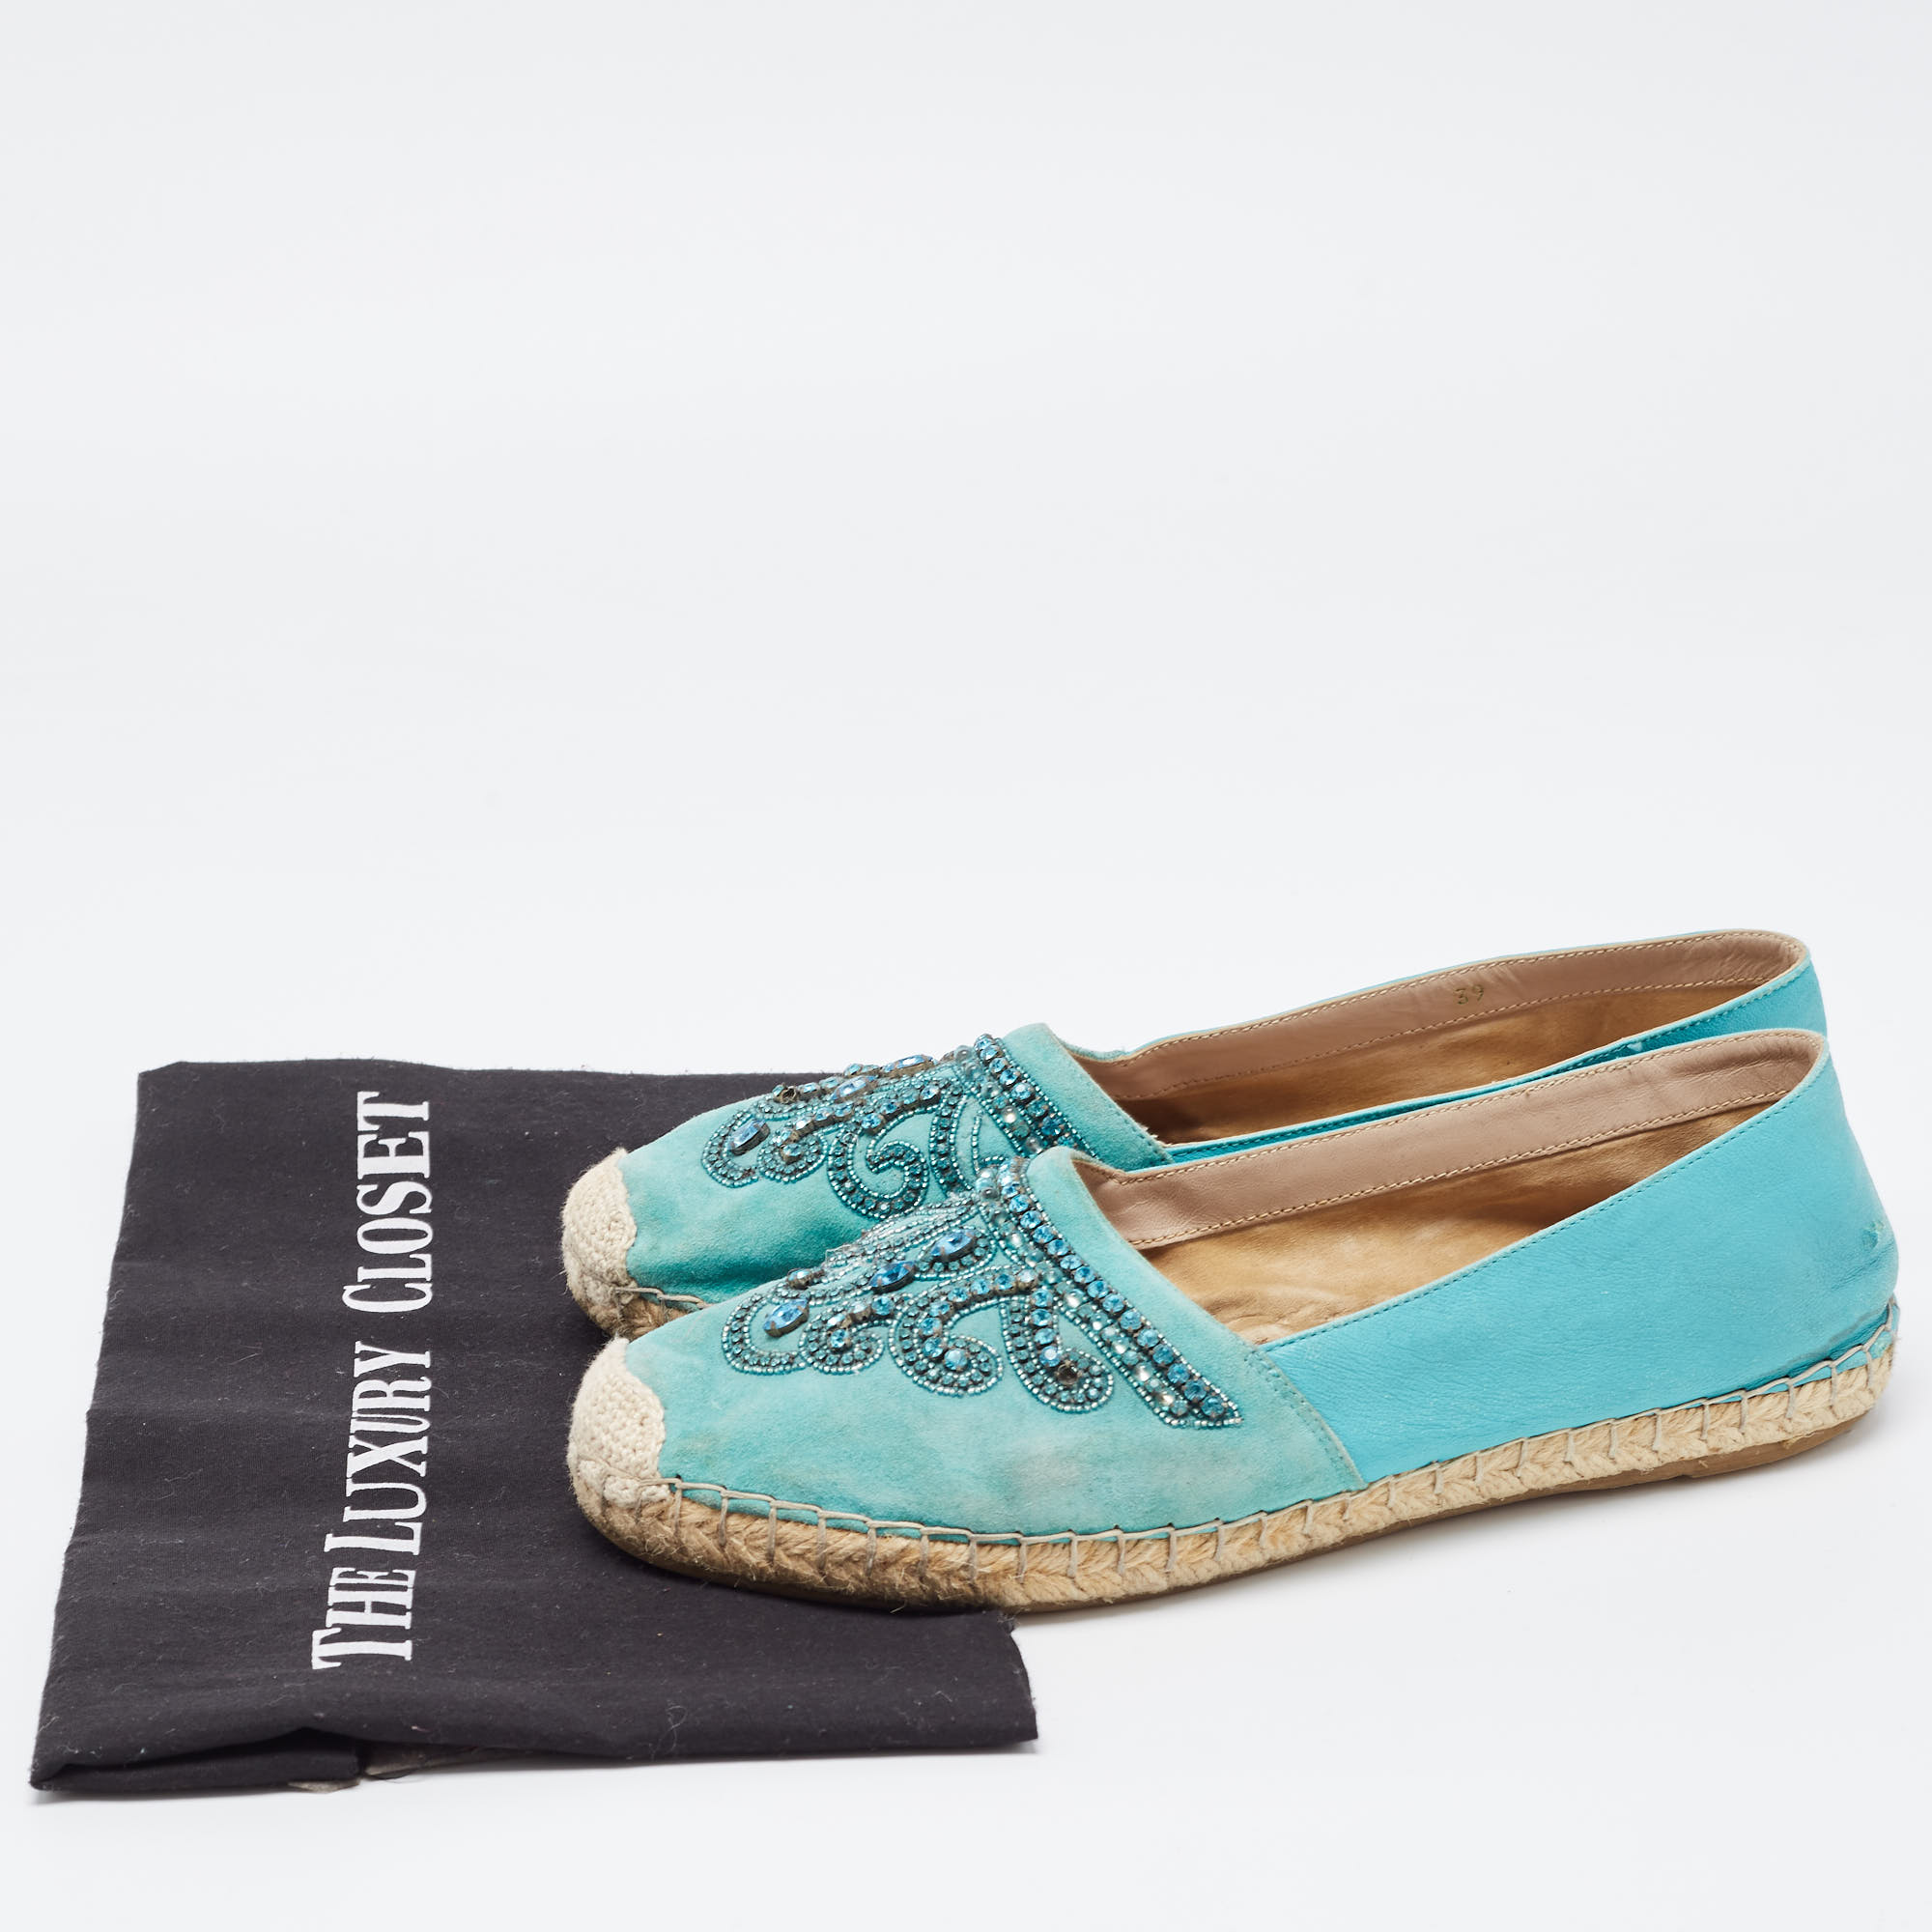 Le Silla Turquoise Suede And Leather Crystal Embellished Espadrille Flats Size 39